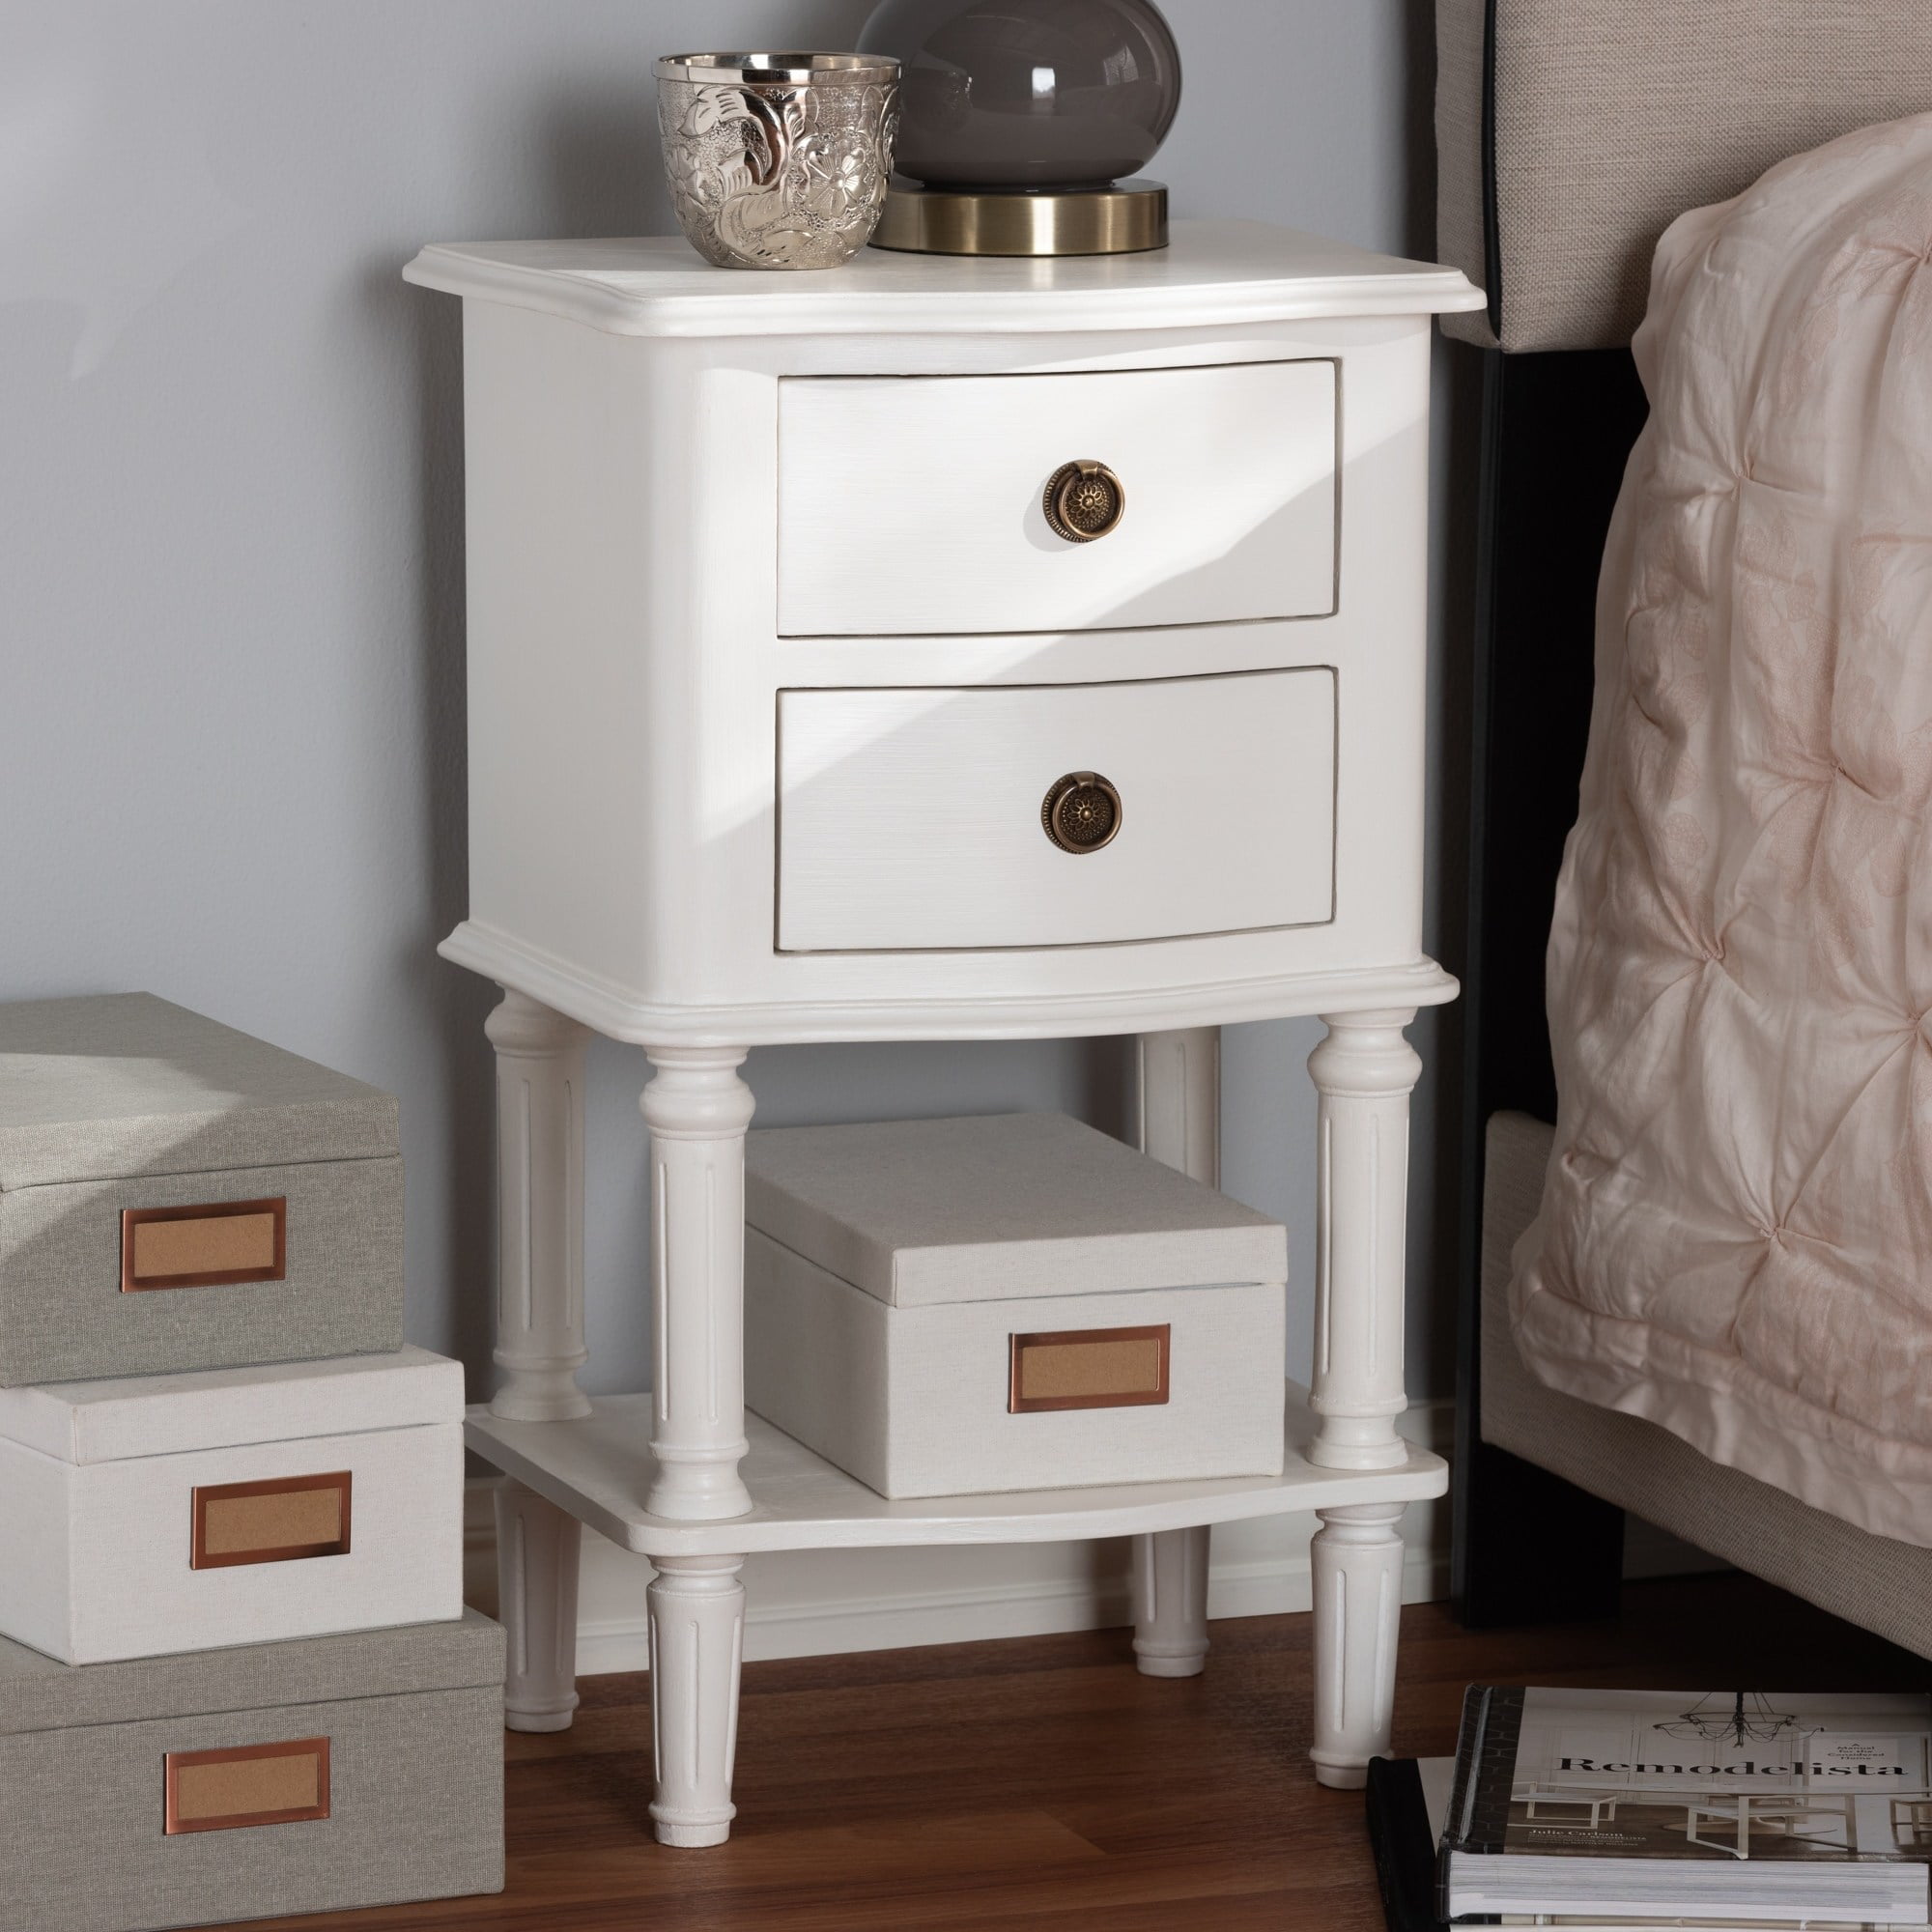 Baxton Studio Farmhouse White Finished 2Drawer Nightstand by Walmart